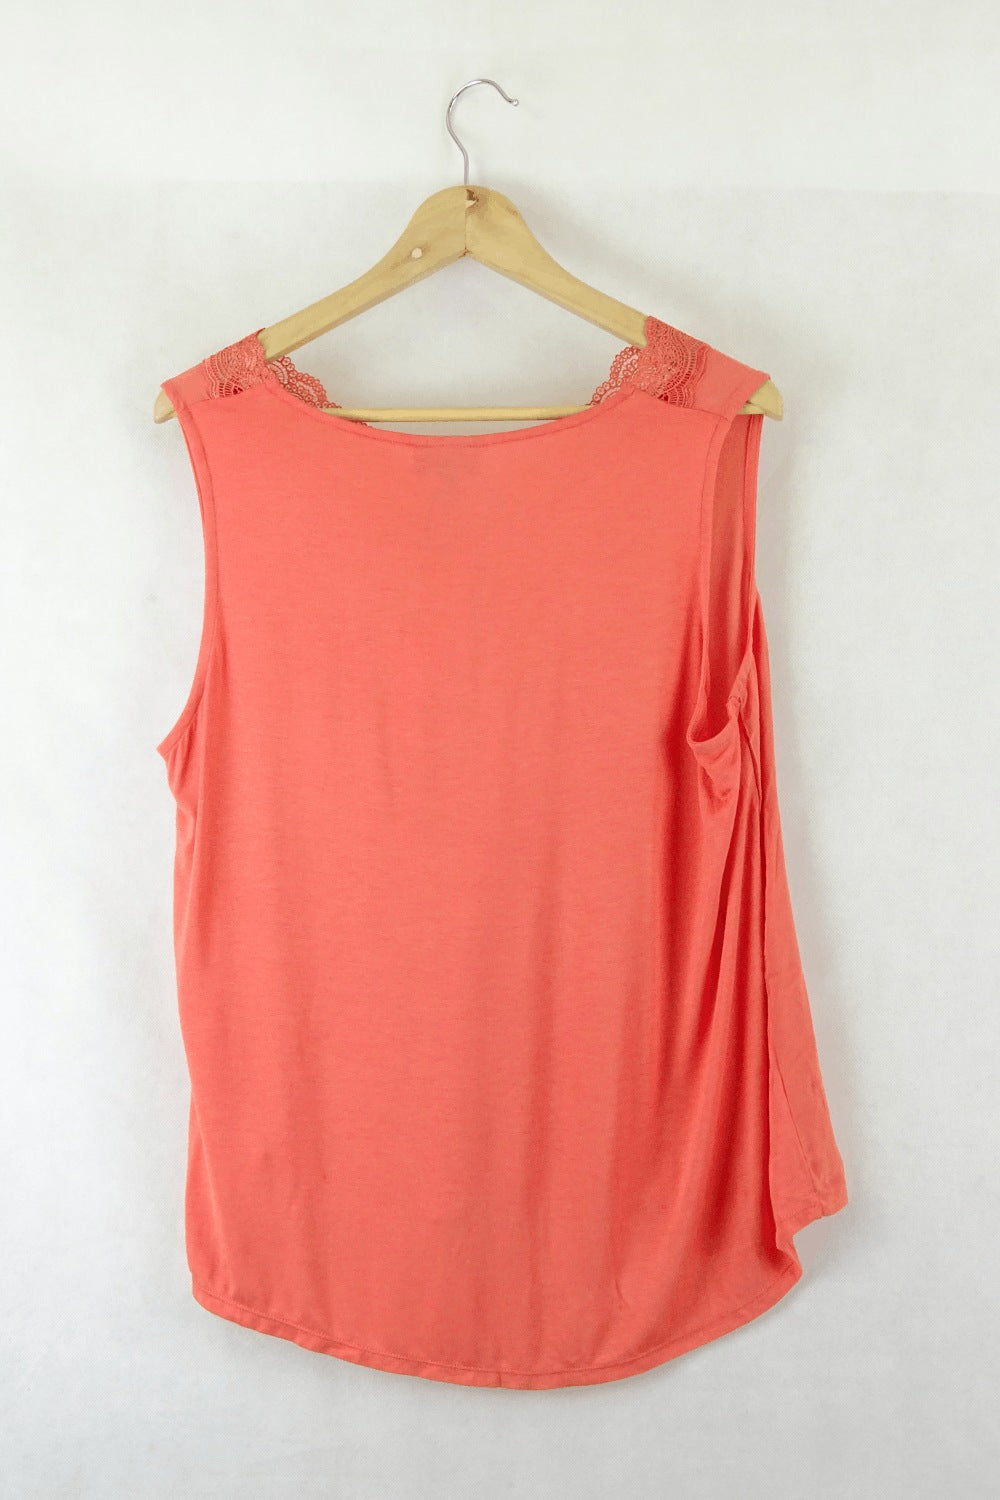 Sussan Sleeveless Coral Top L